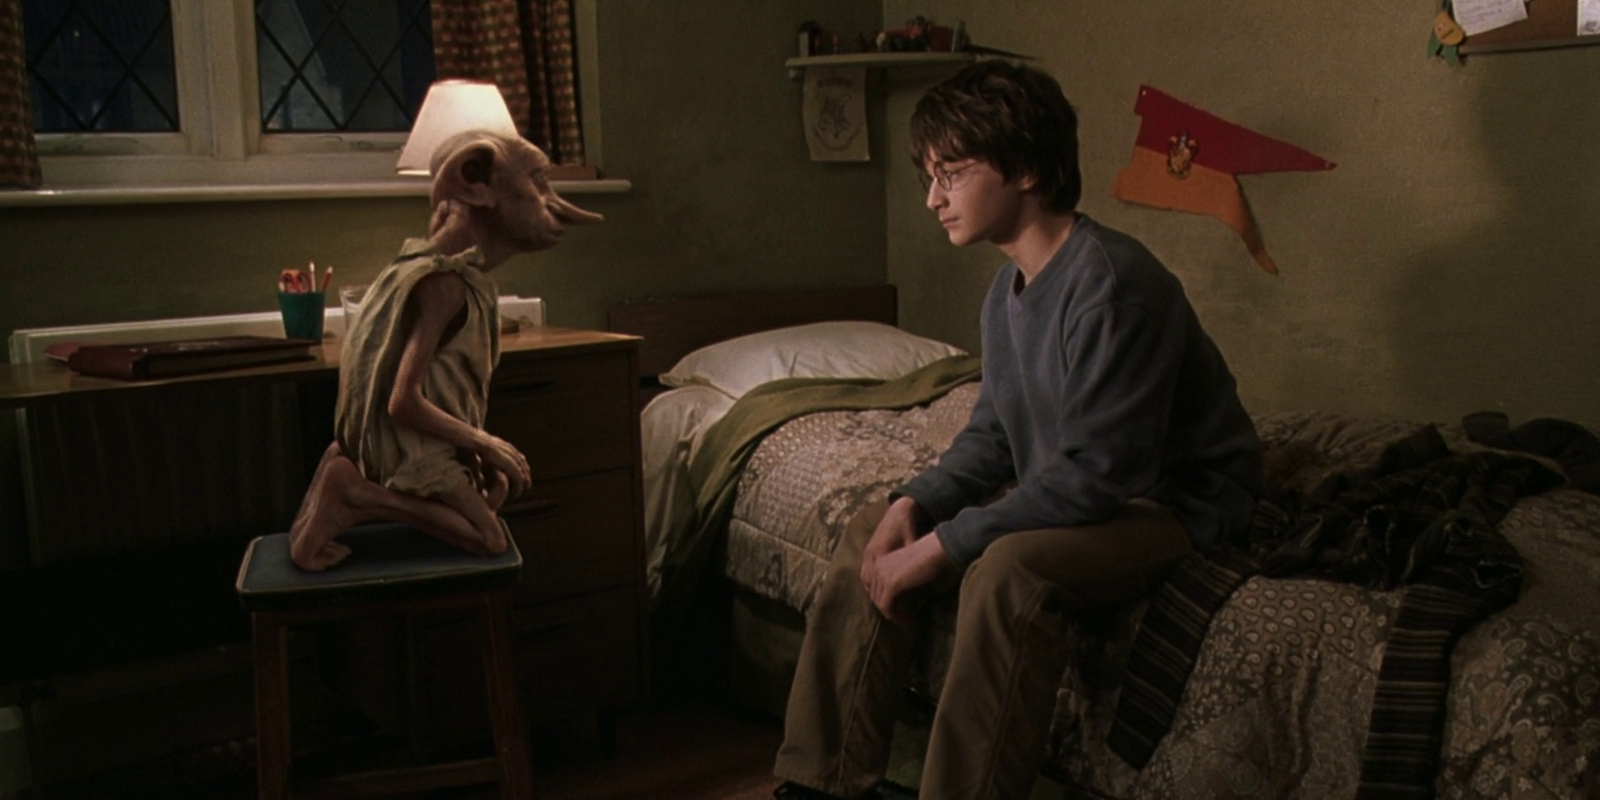 Dobby and Harry Potter arguing